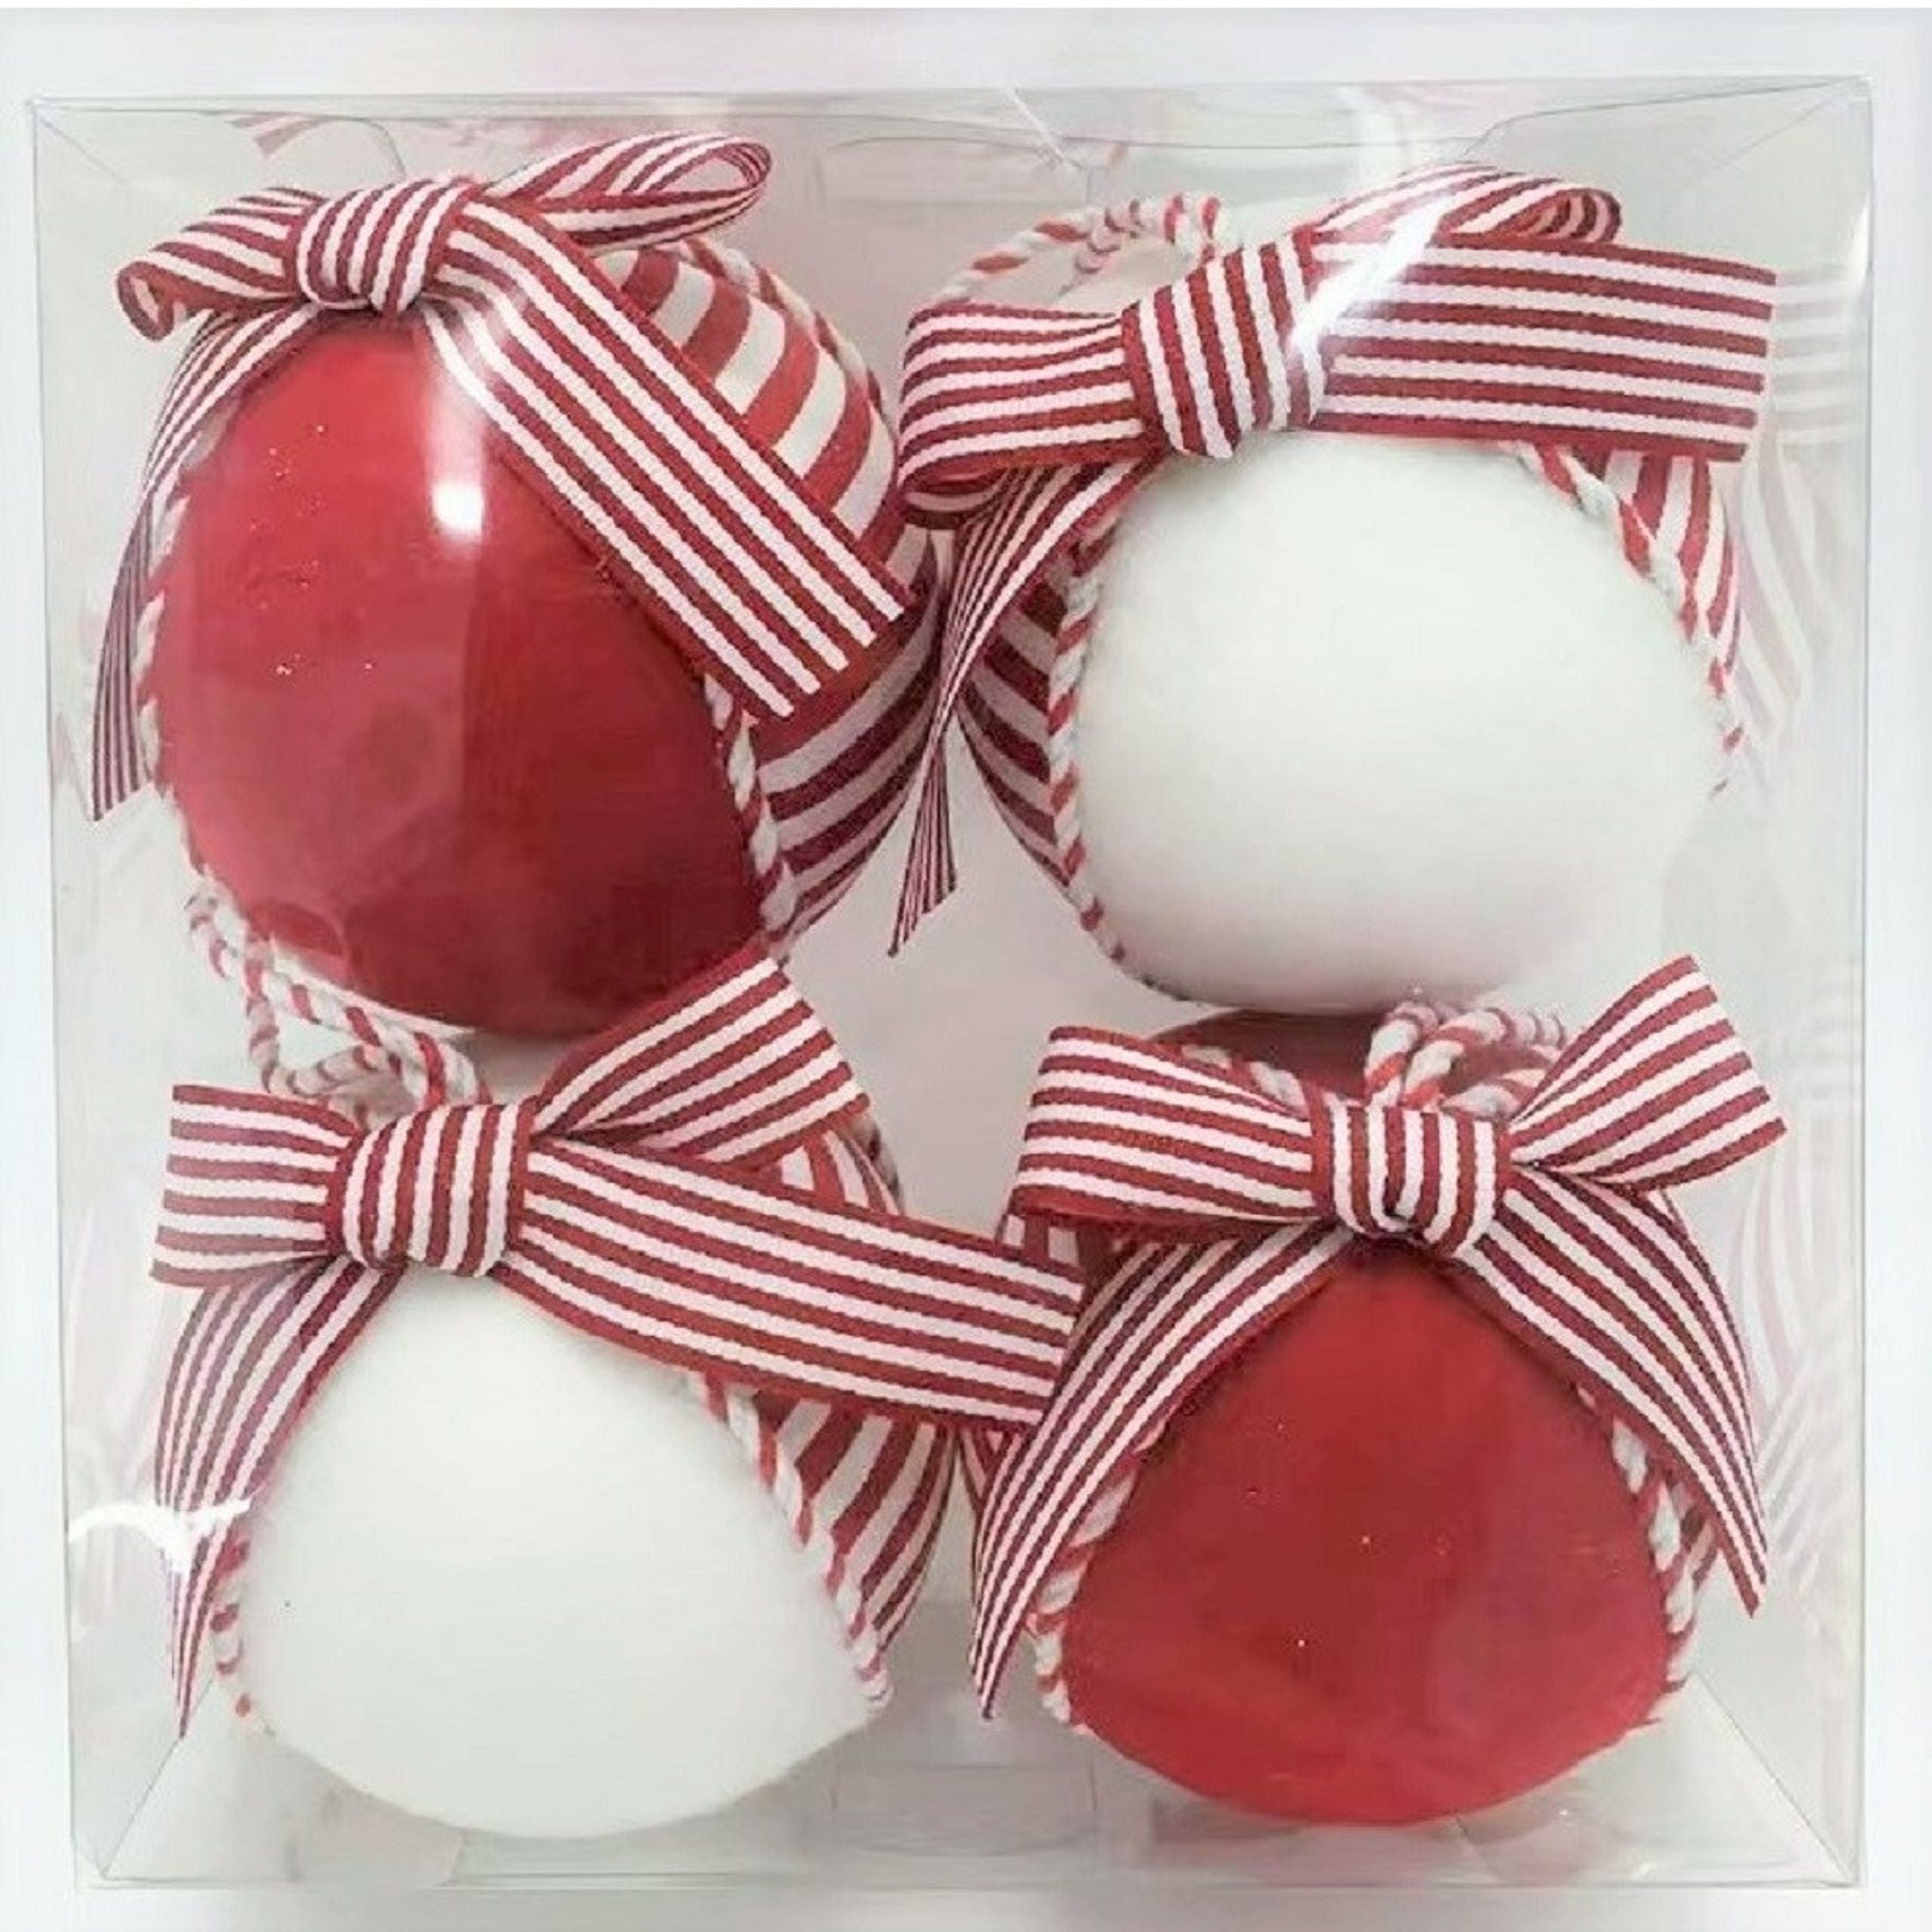 Holiday Time 4pk Red/White Ball Ornament. Cottage Christmas Theme. Red & White Color.